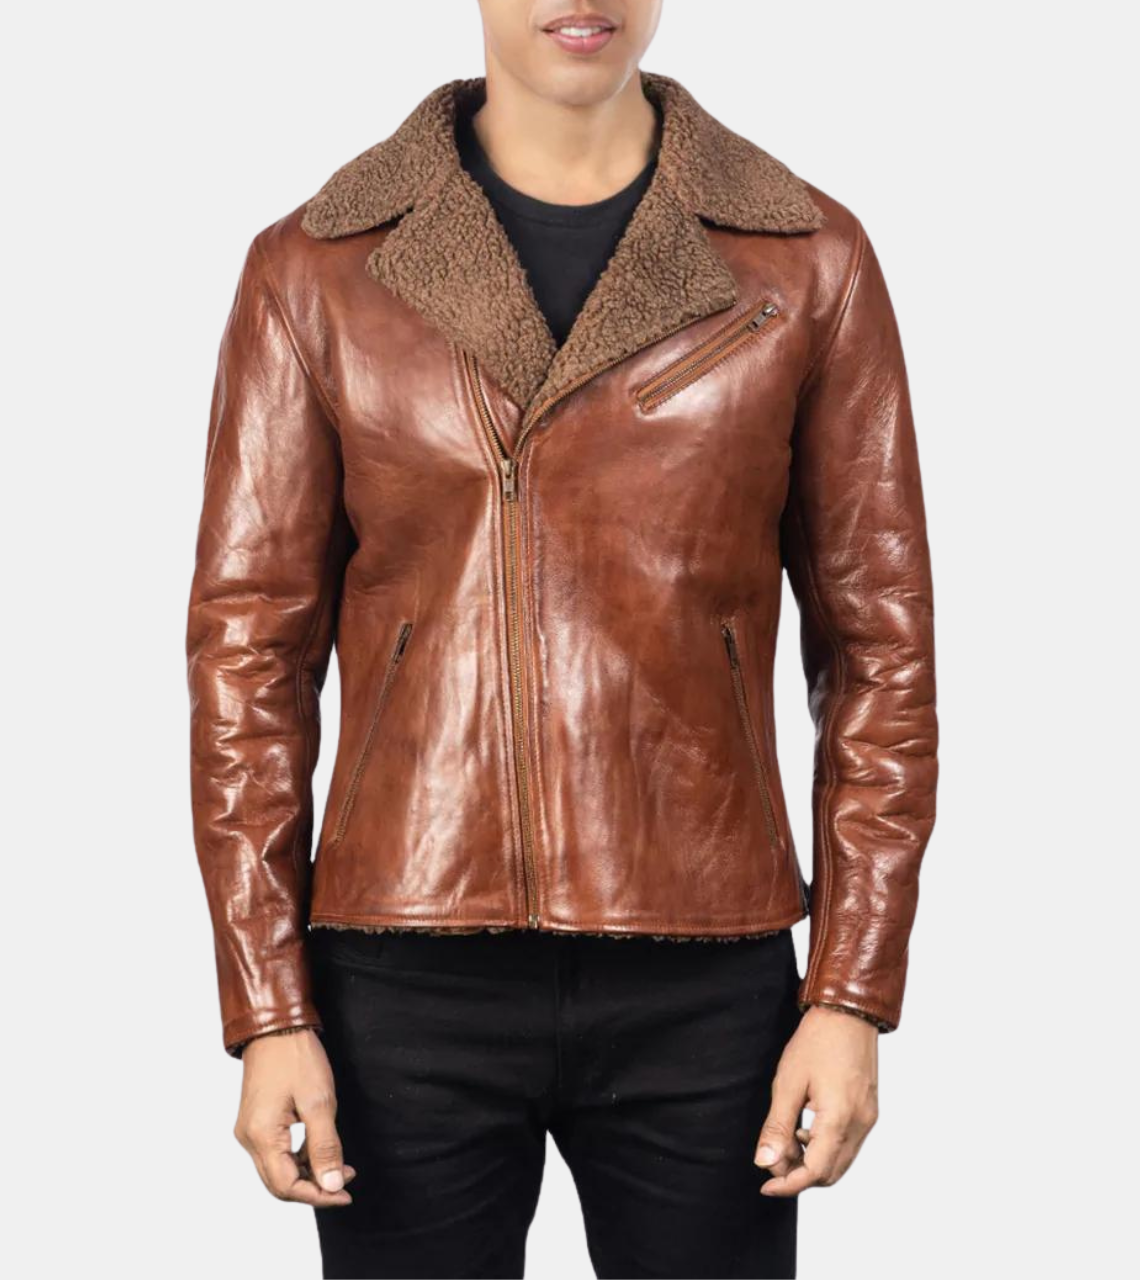  Men's Distressed Shearling Brown Leather Jacket